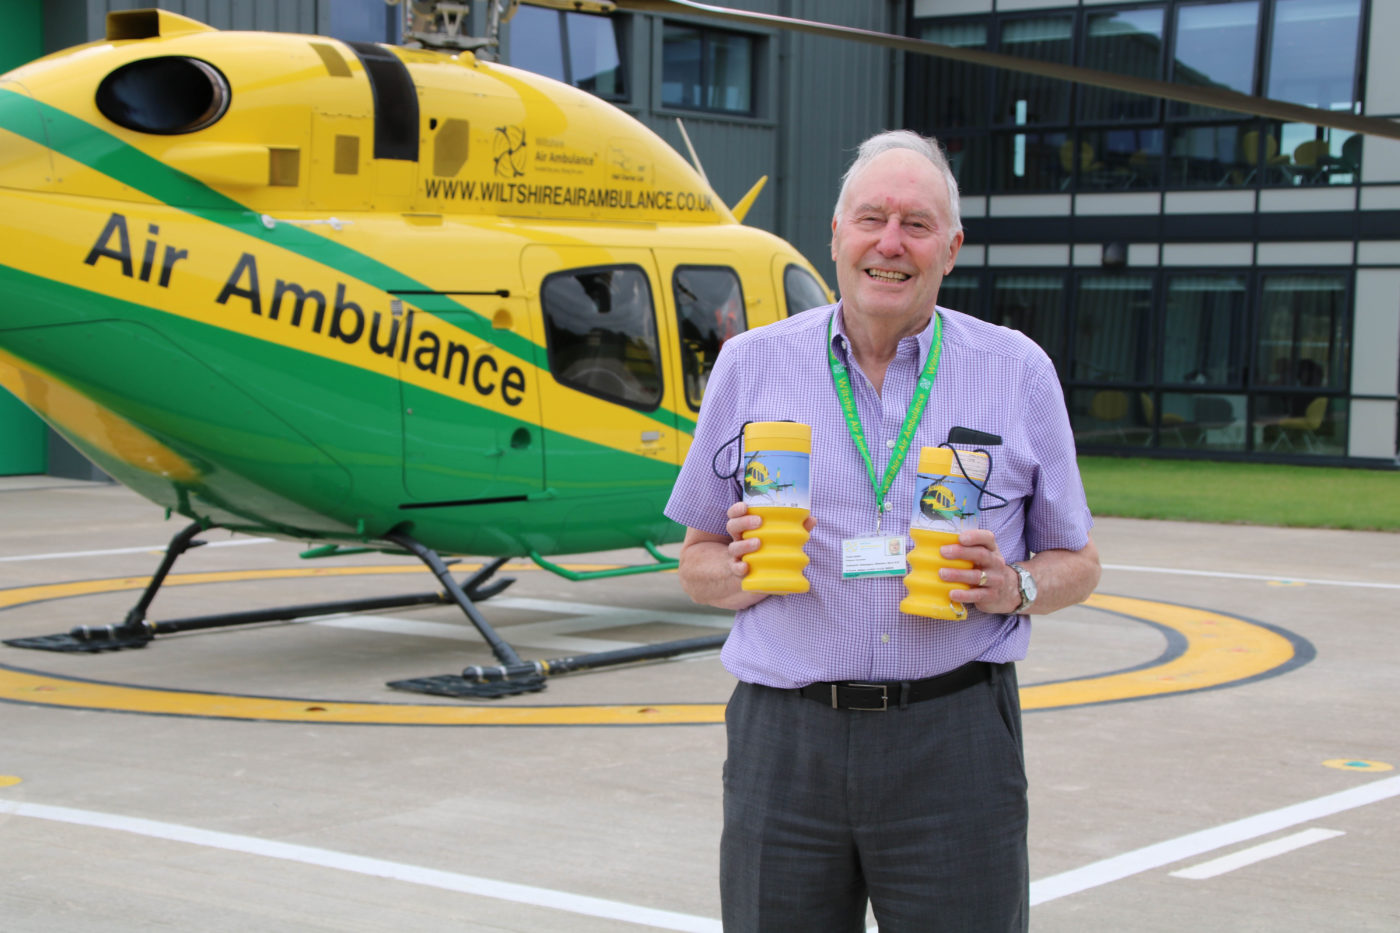 Colin Smith, Wiltshire Air Ambulance’s volunteer collection tin coordinator, on the helipad at Wiltshire Air Ambulance’s airbase at Semington.